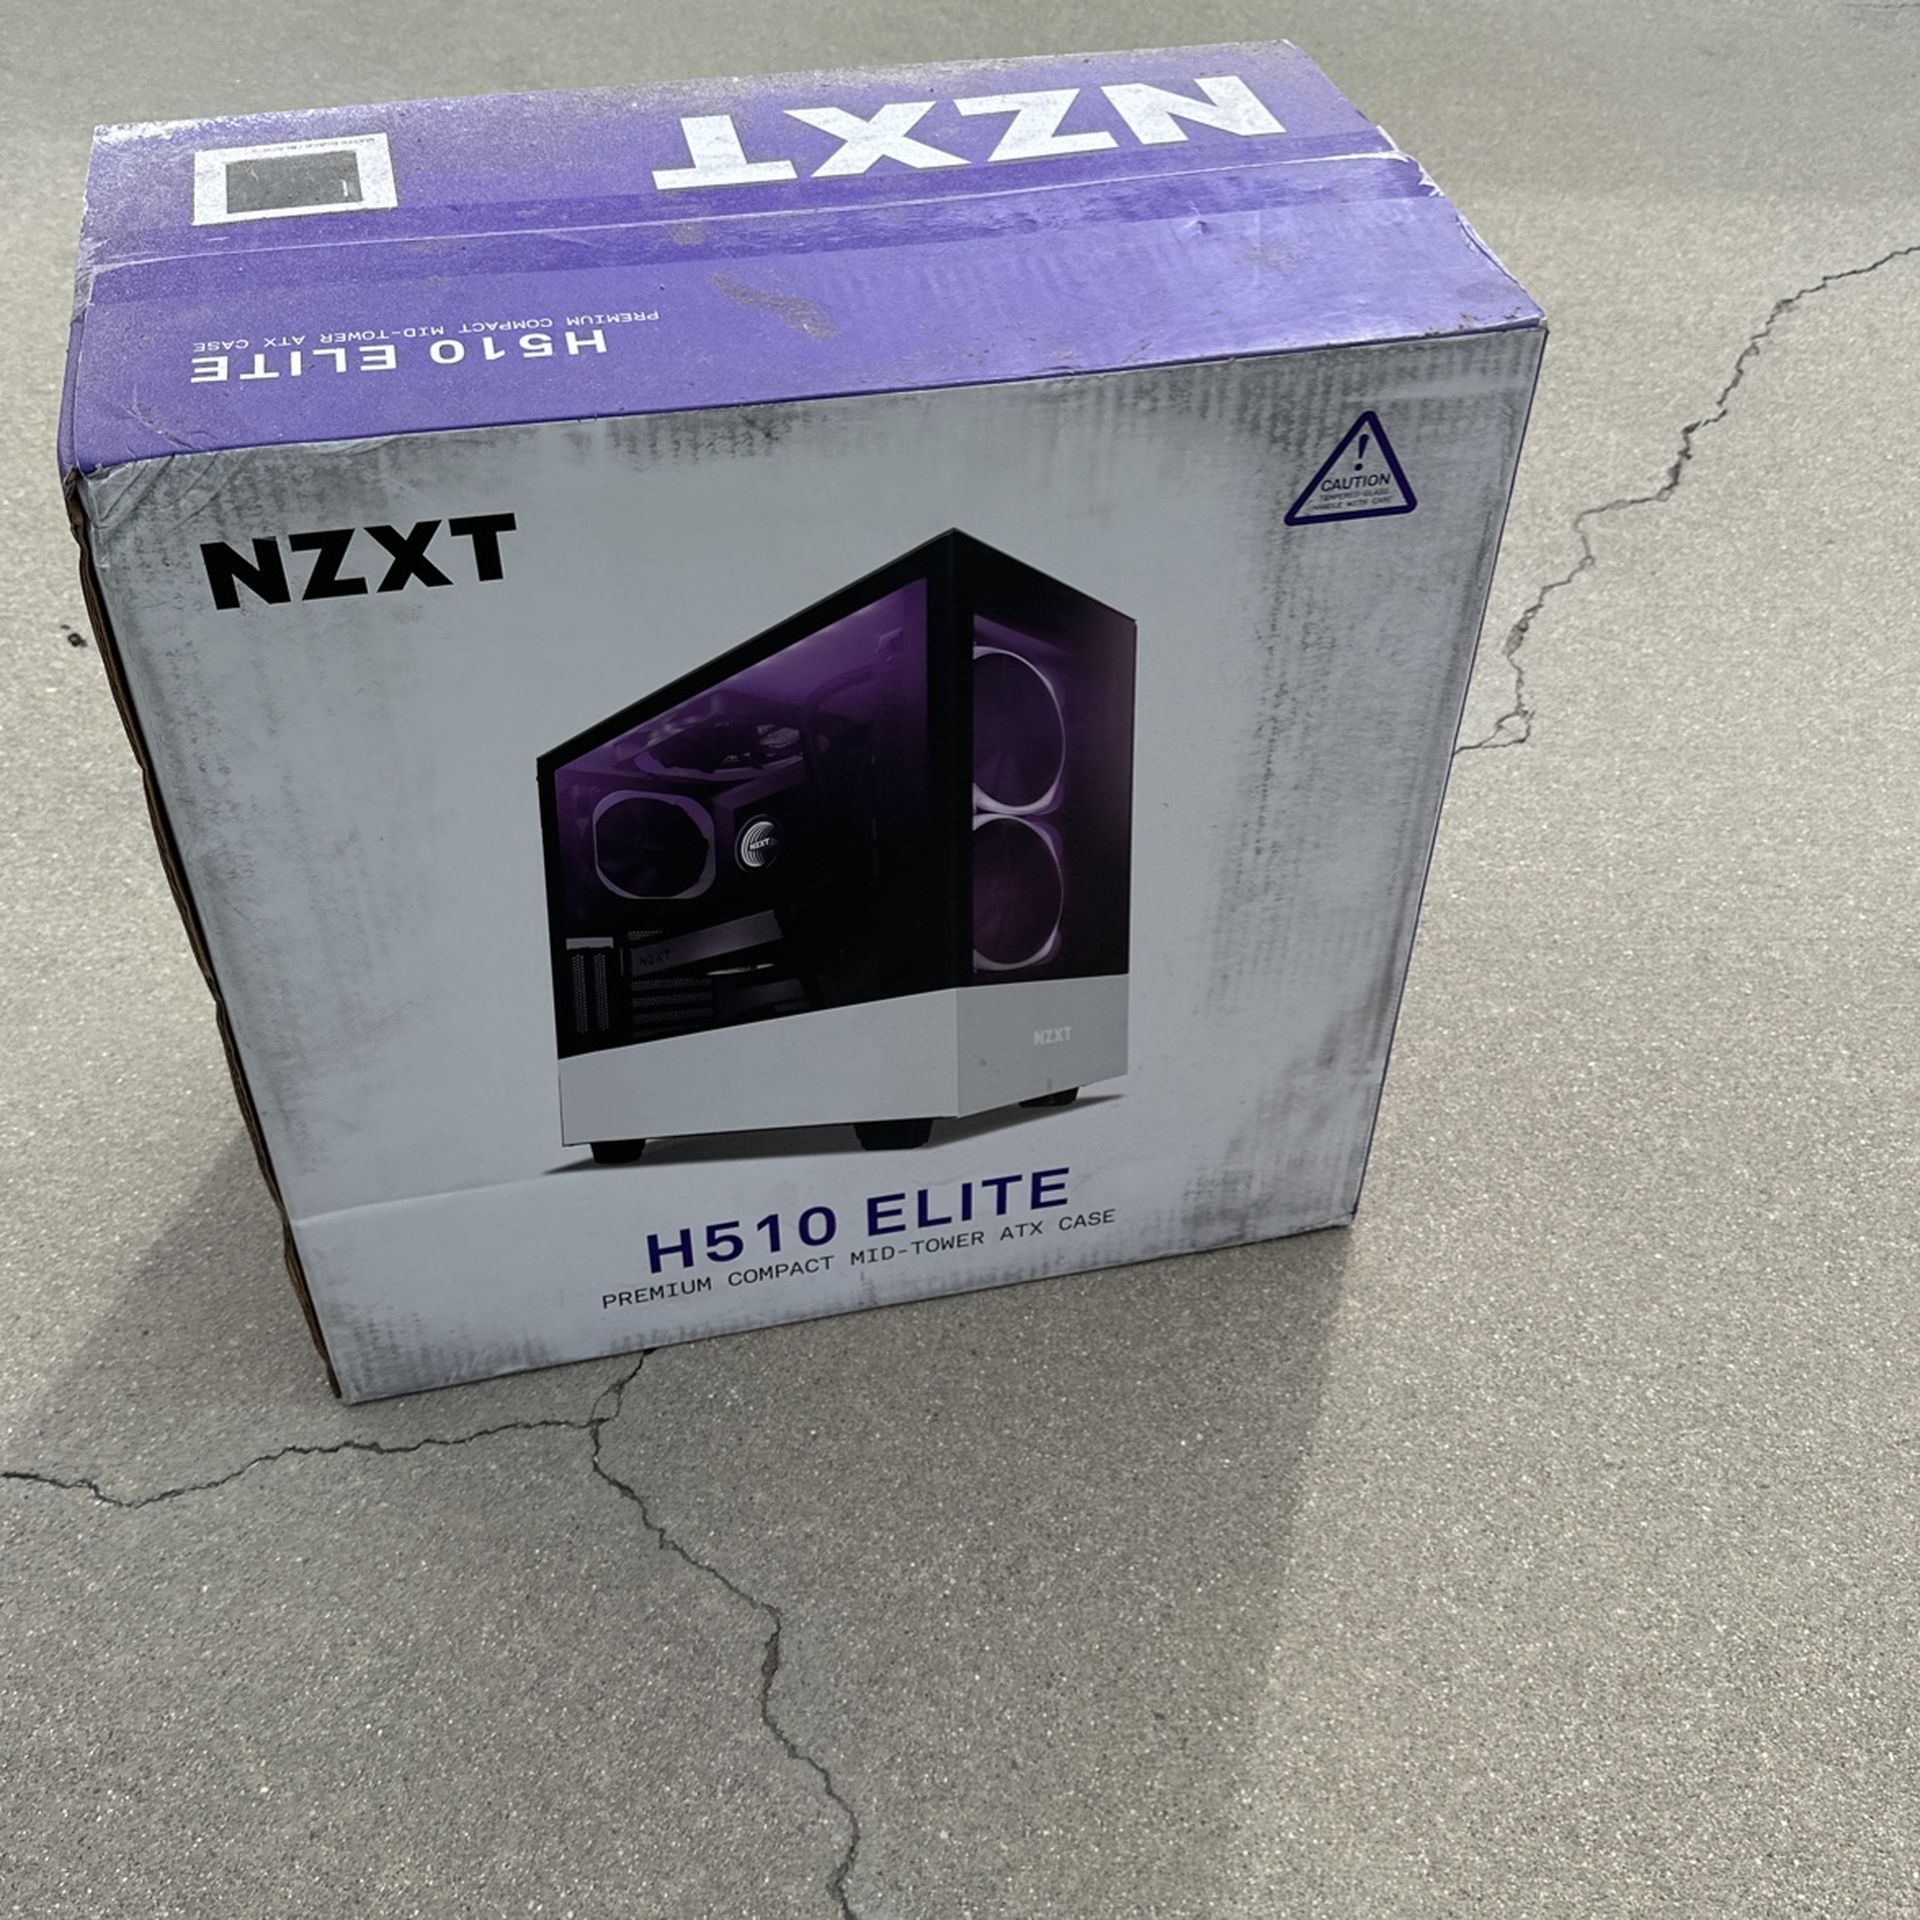 NZXT Computer Tower